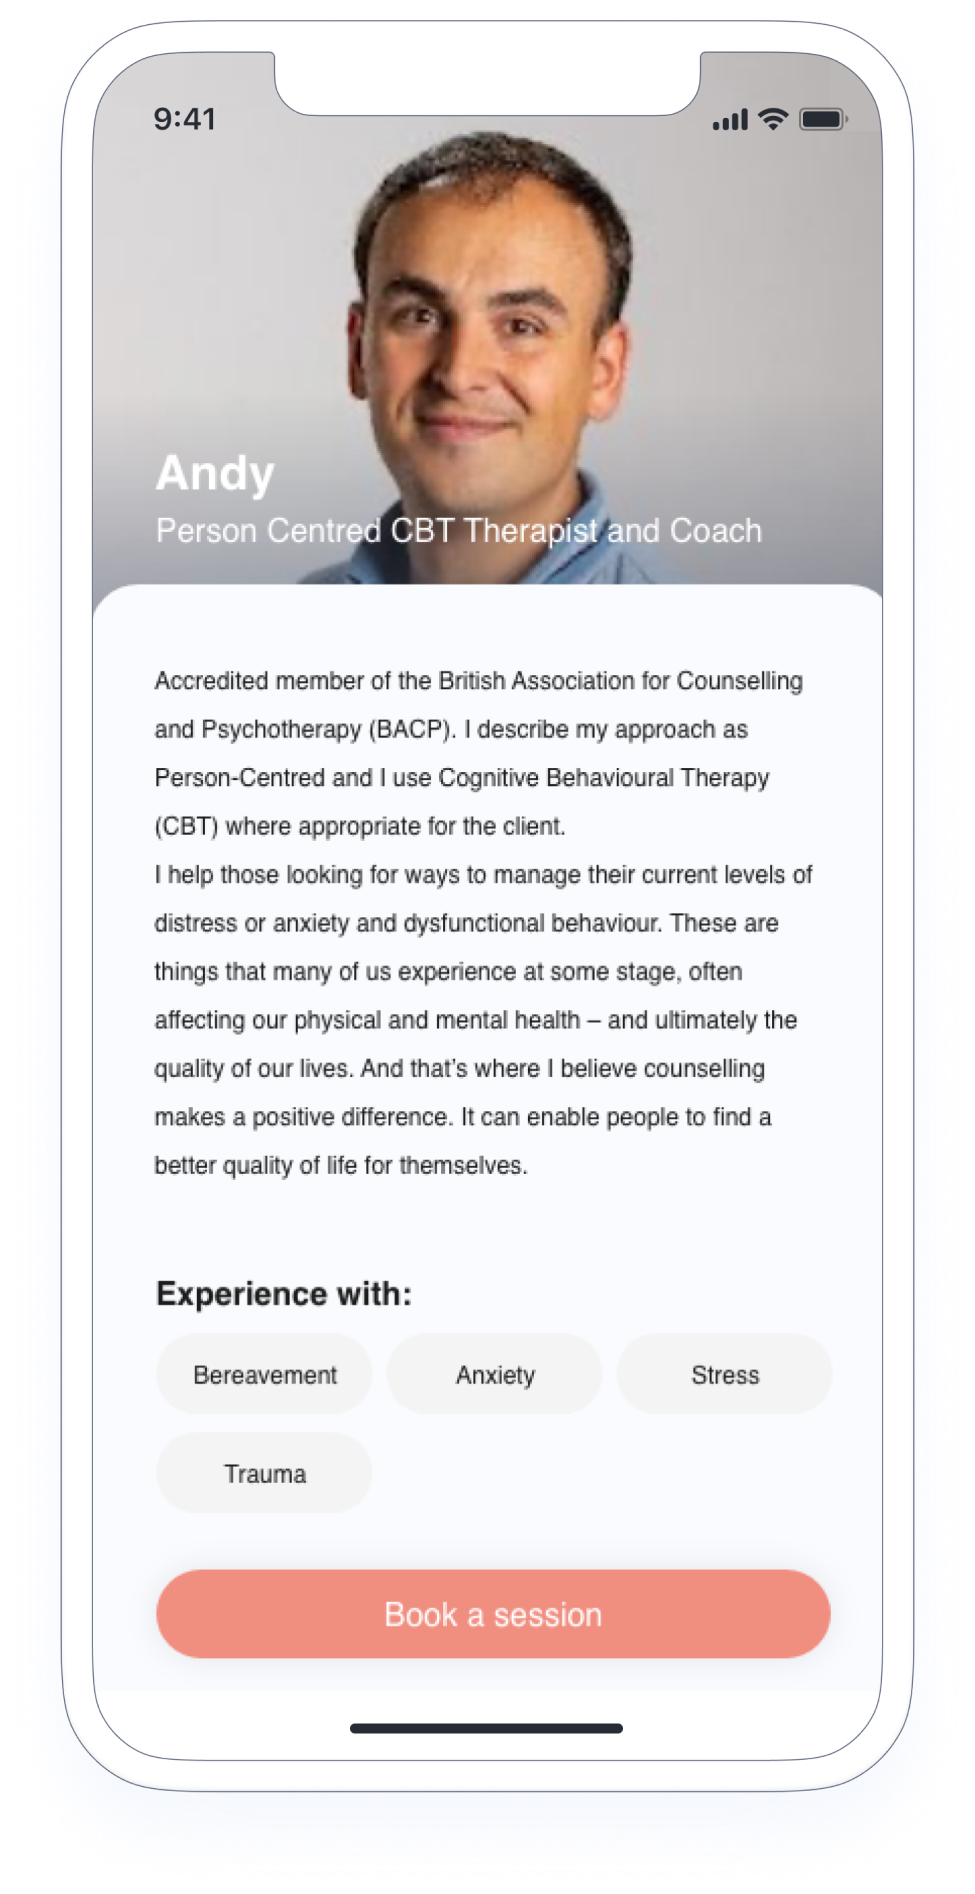 Individual profile page of the therapist